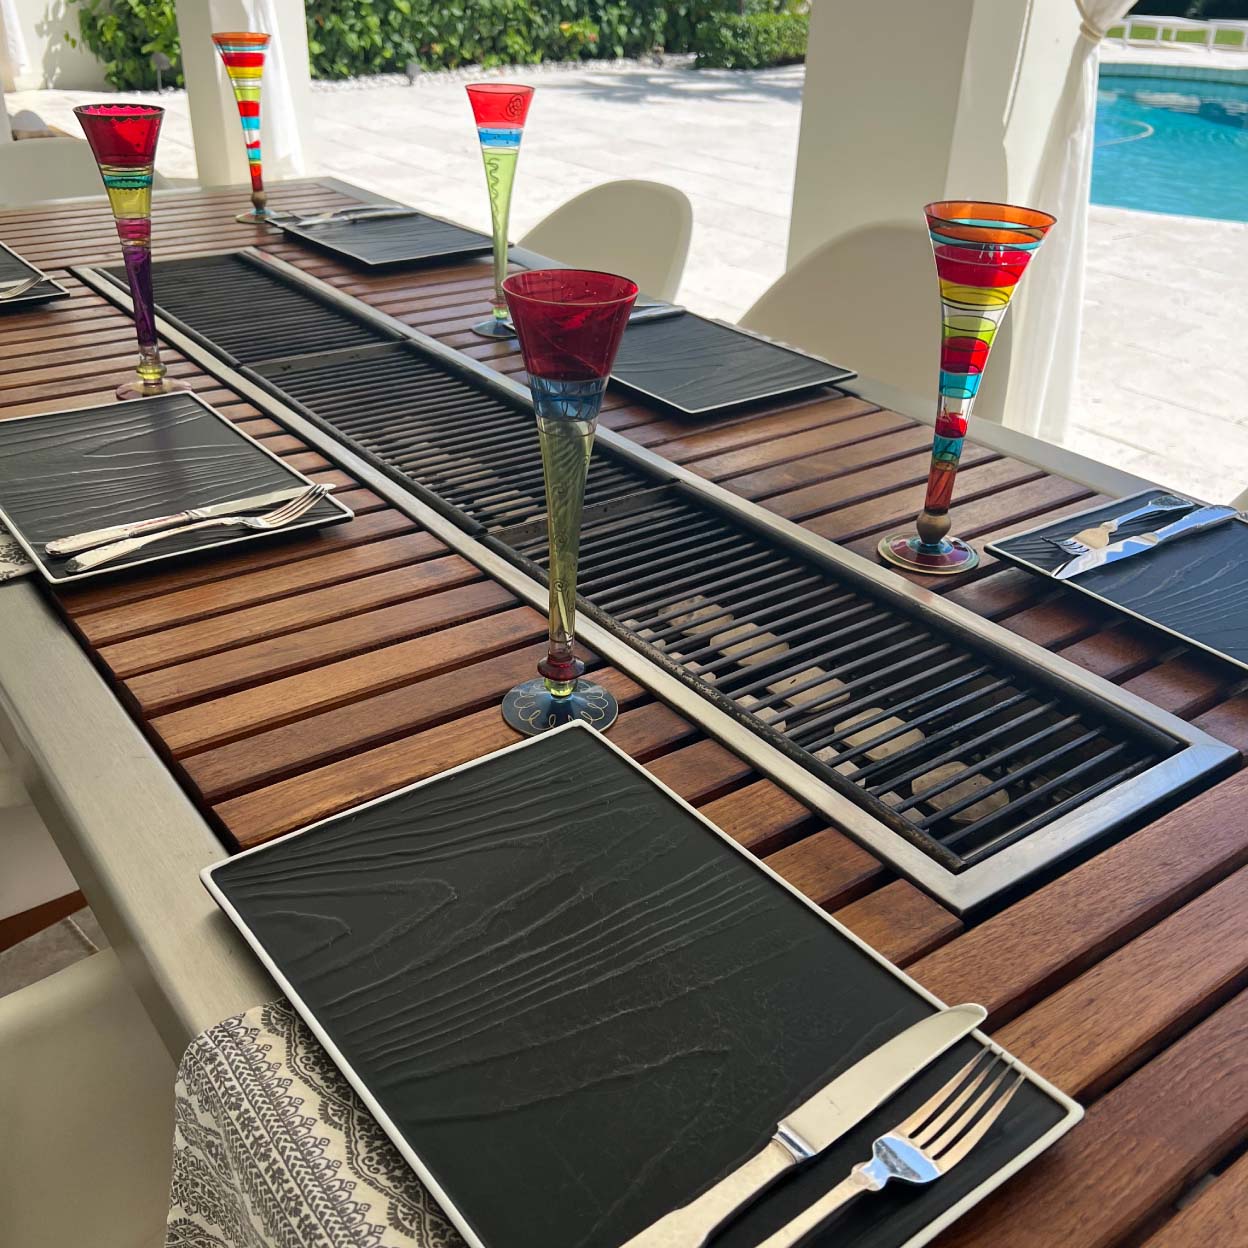 dining table with built in grill